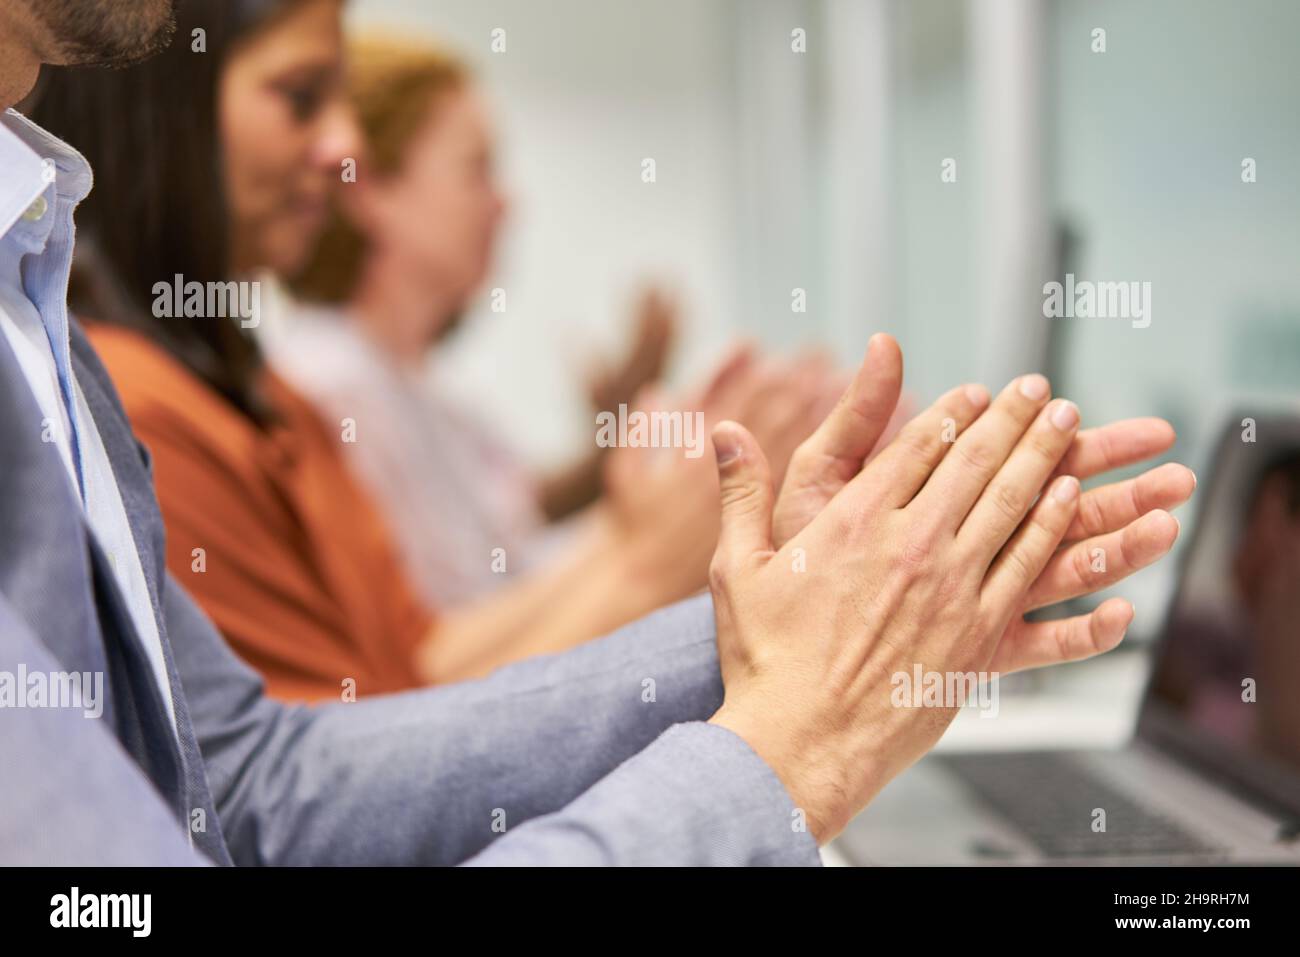 Business workshop participants applaud as a symbol of praise and recognition Stock Photo